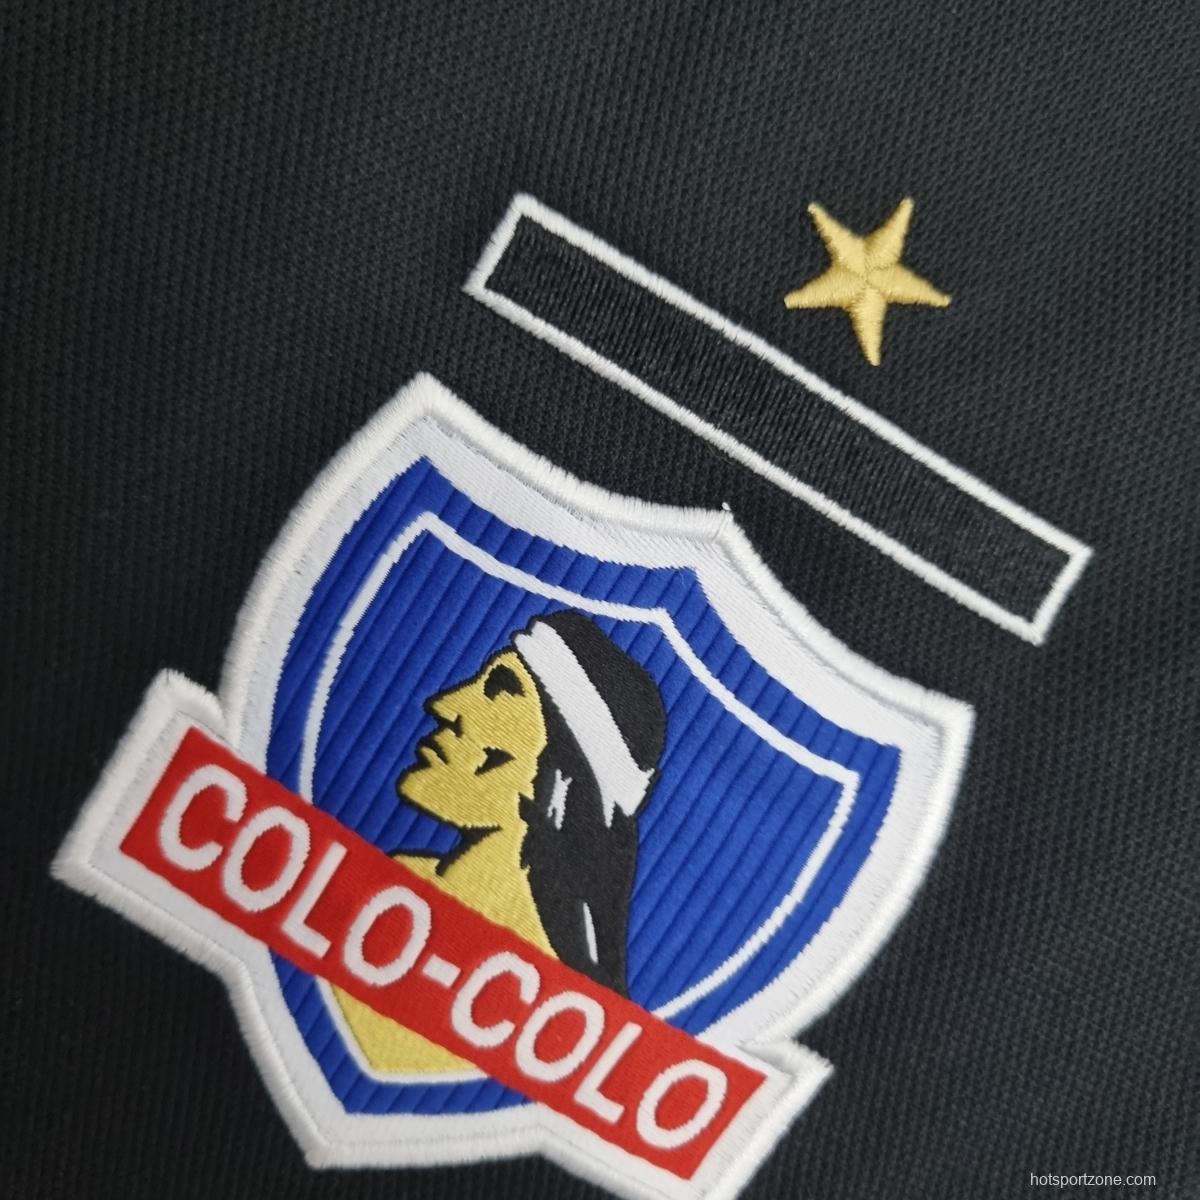 22/23 Long Sleeve Colo Colo away Soccer Jersey